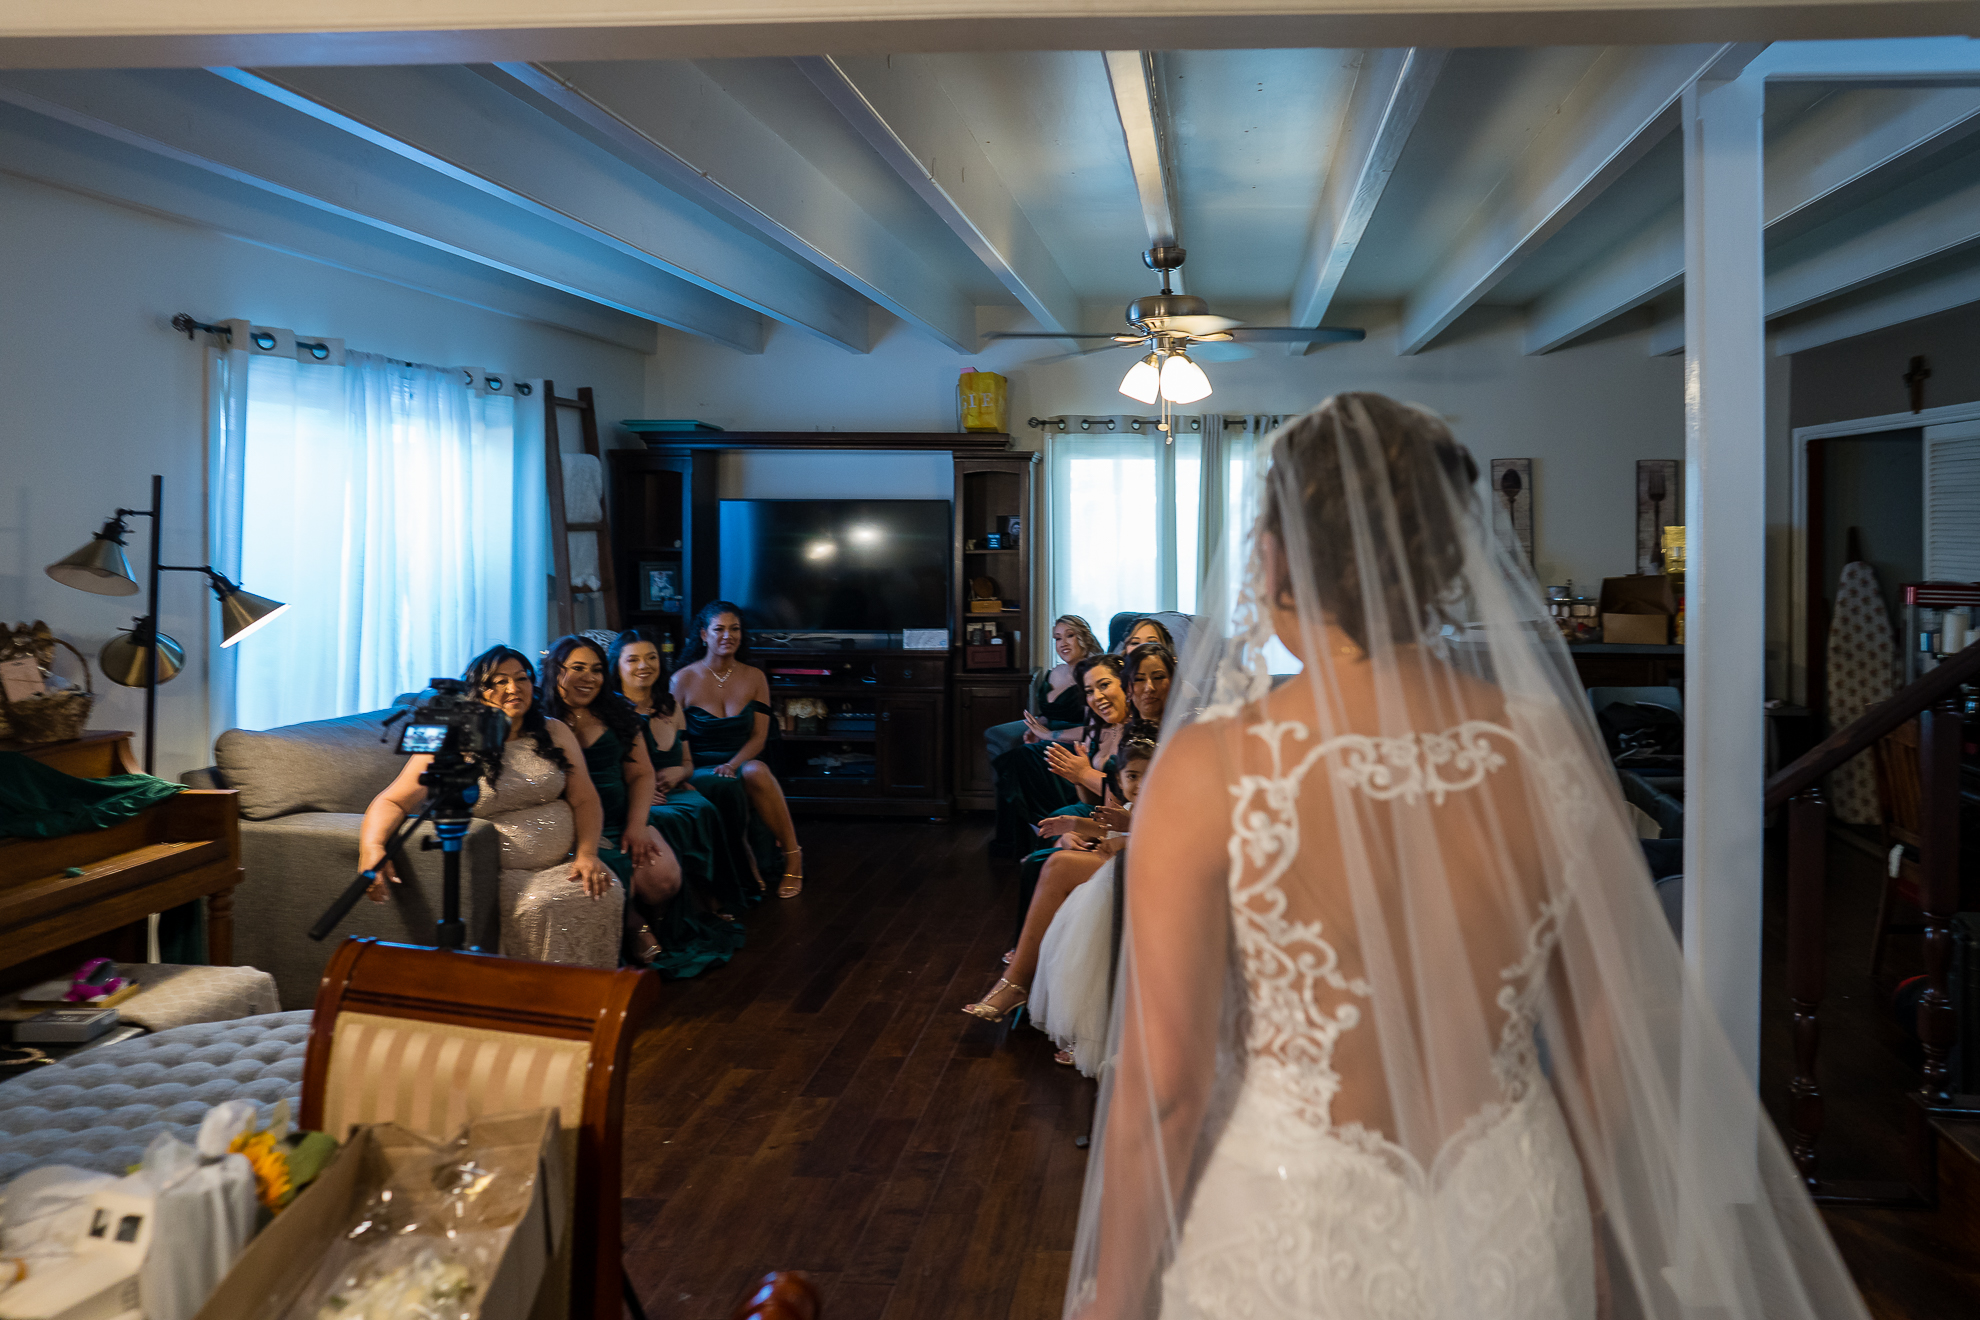 ThomasKim_photography A bride walks down the S aisle in front of a room full of A people.